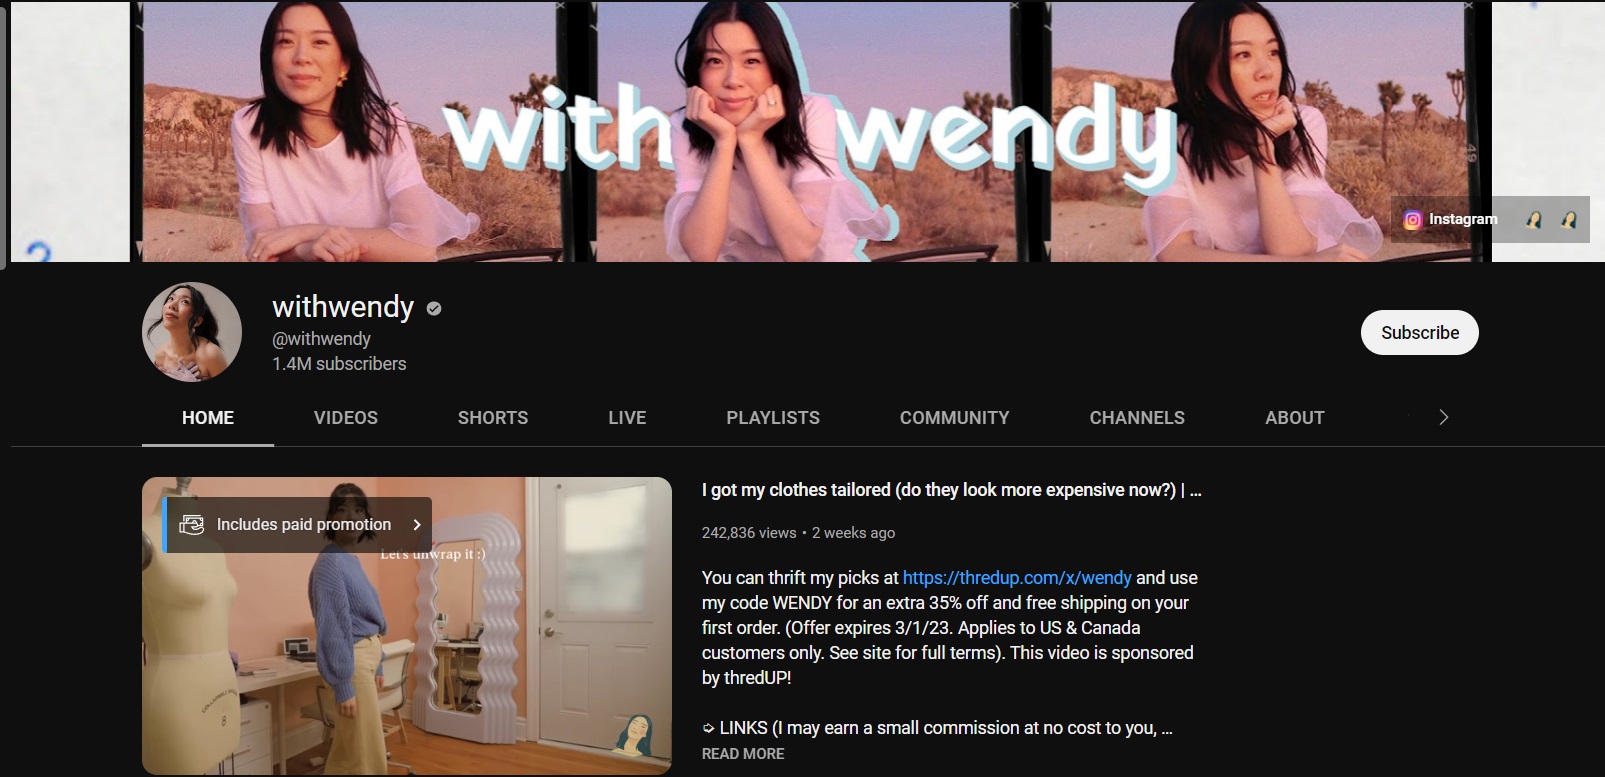 Withwendy's YouTube Channel